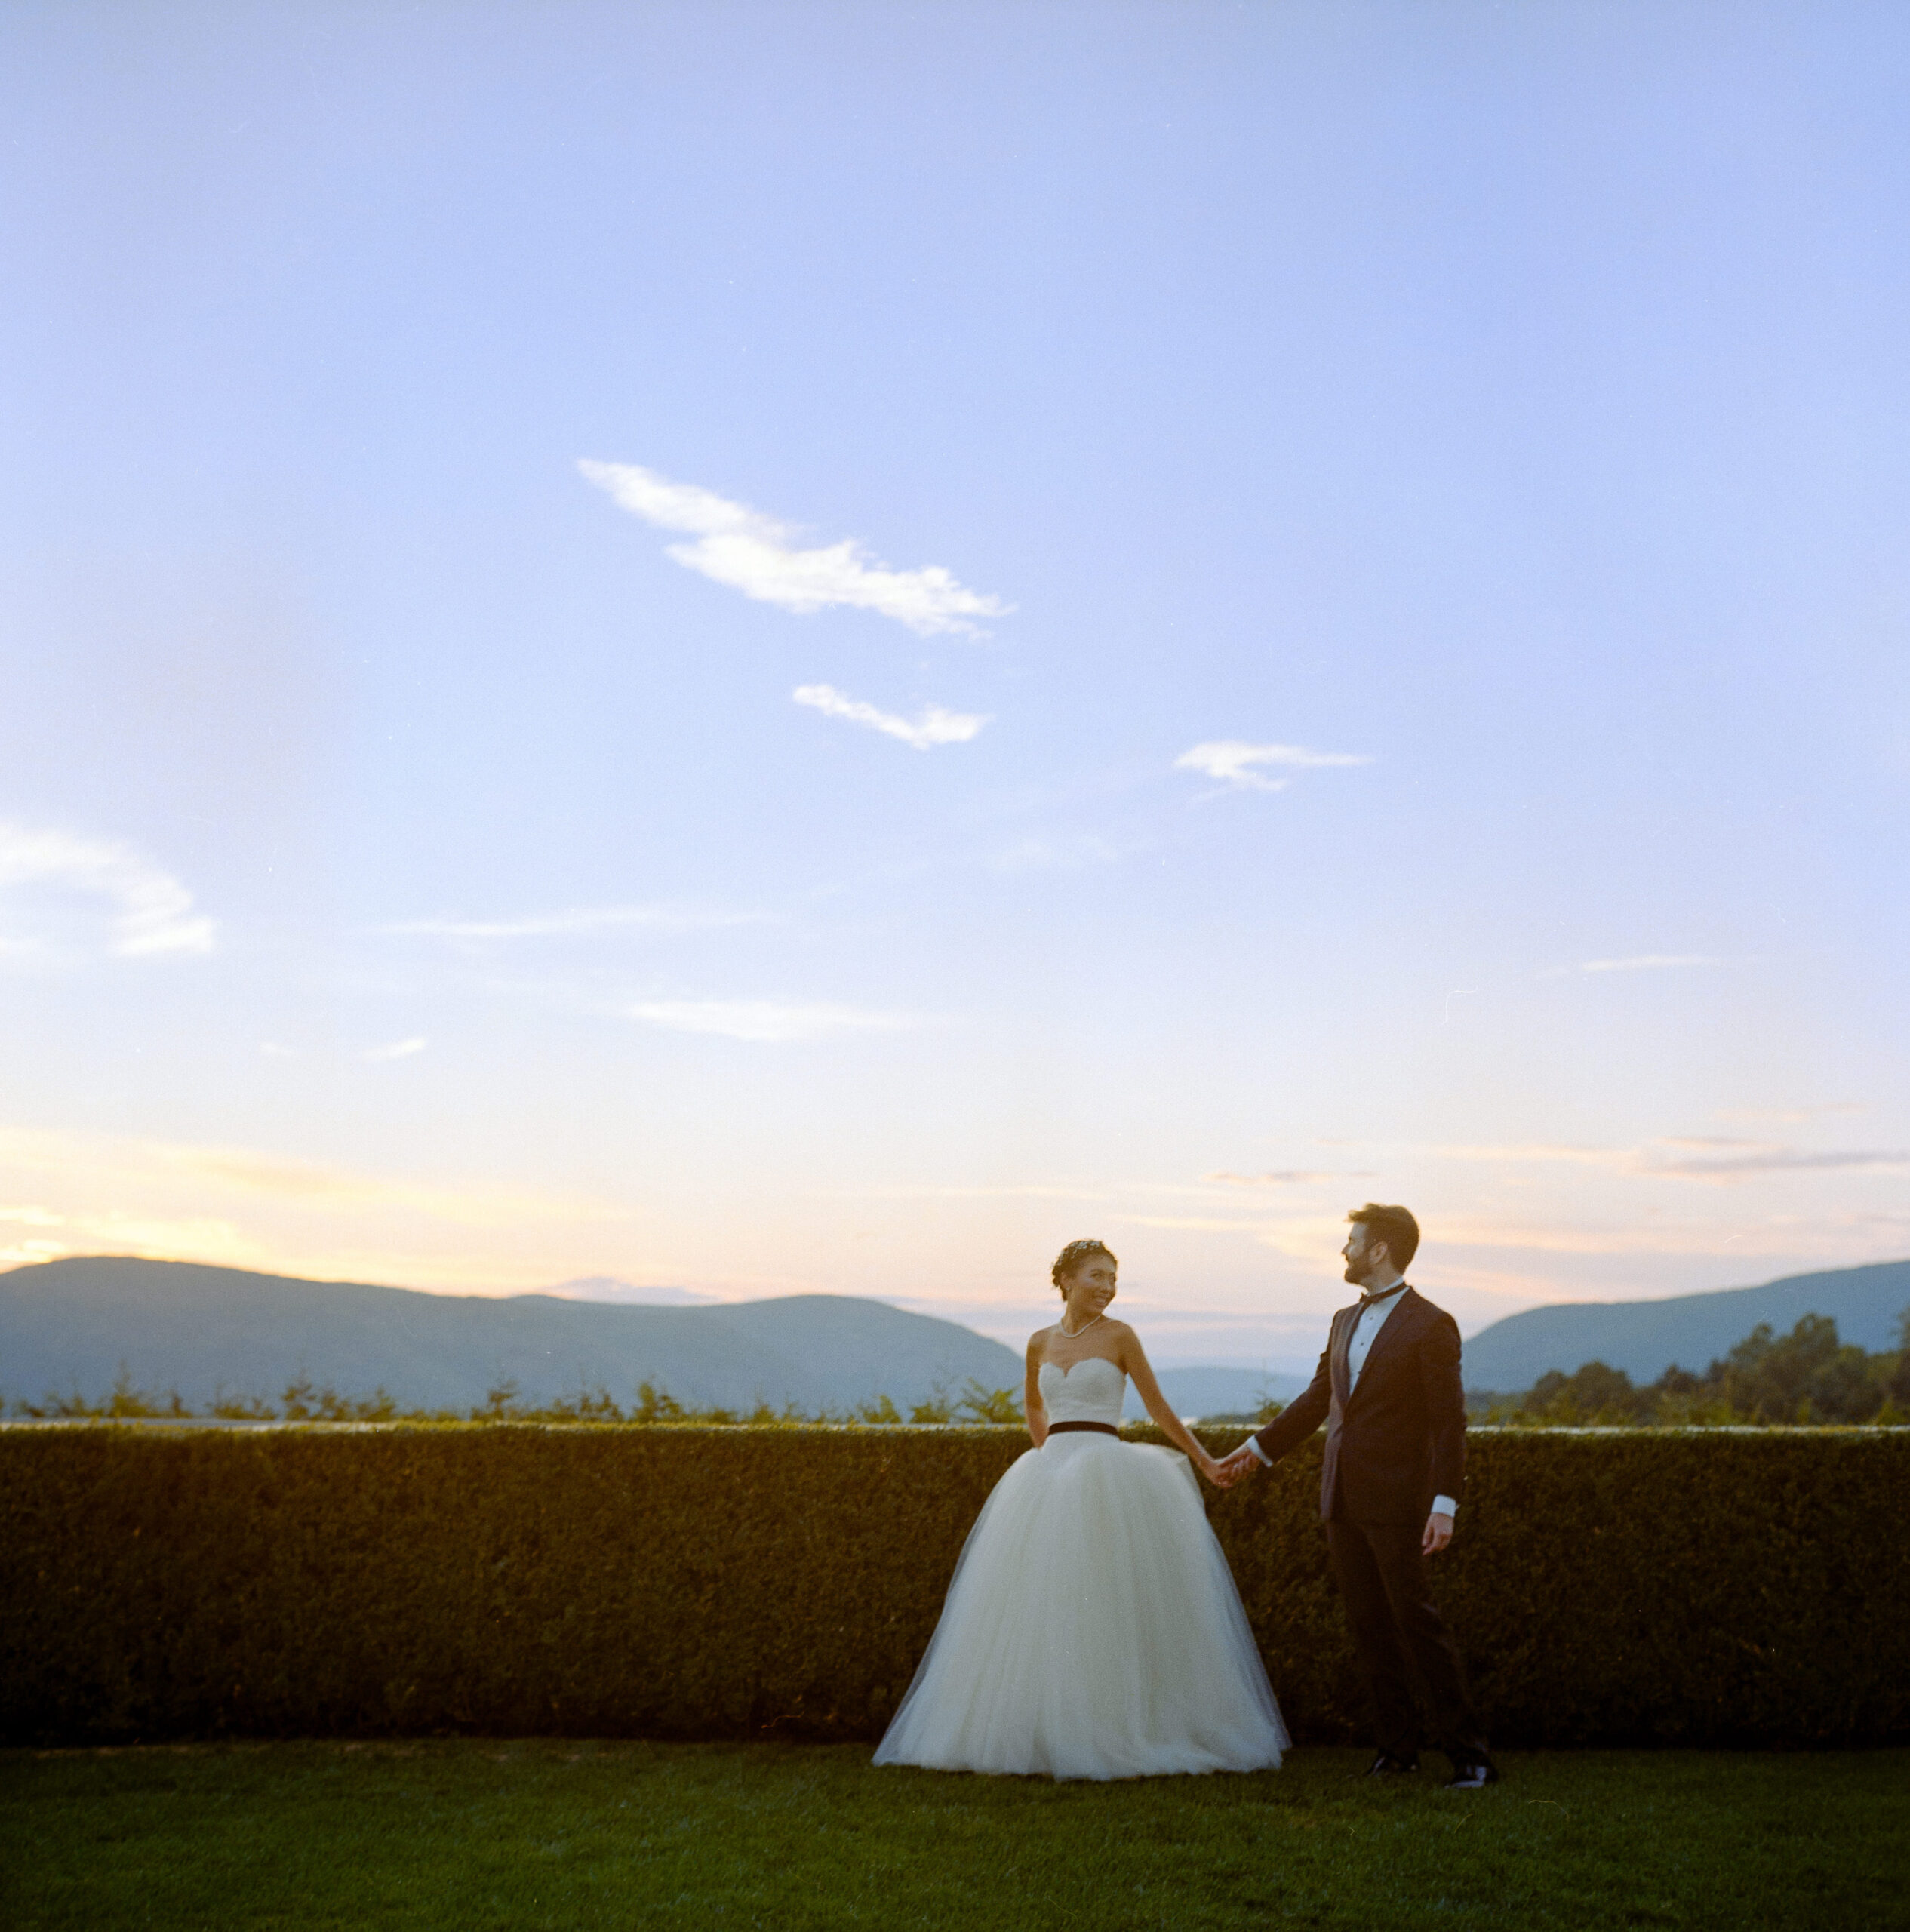 Film wedding photo of the newlyweds outdoors with sunset in the background. Image by Jenny Fu Studio